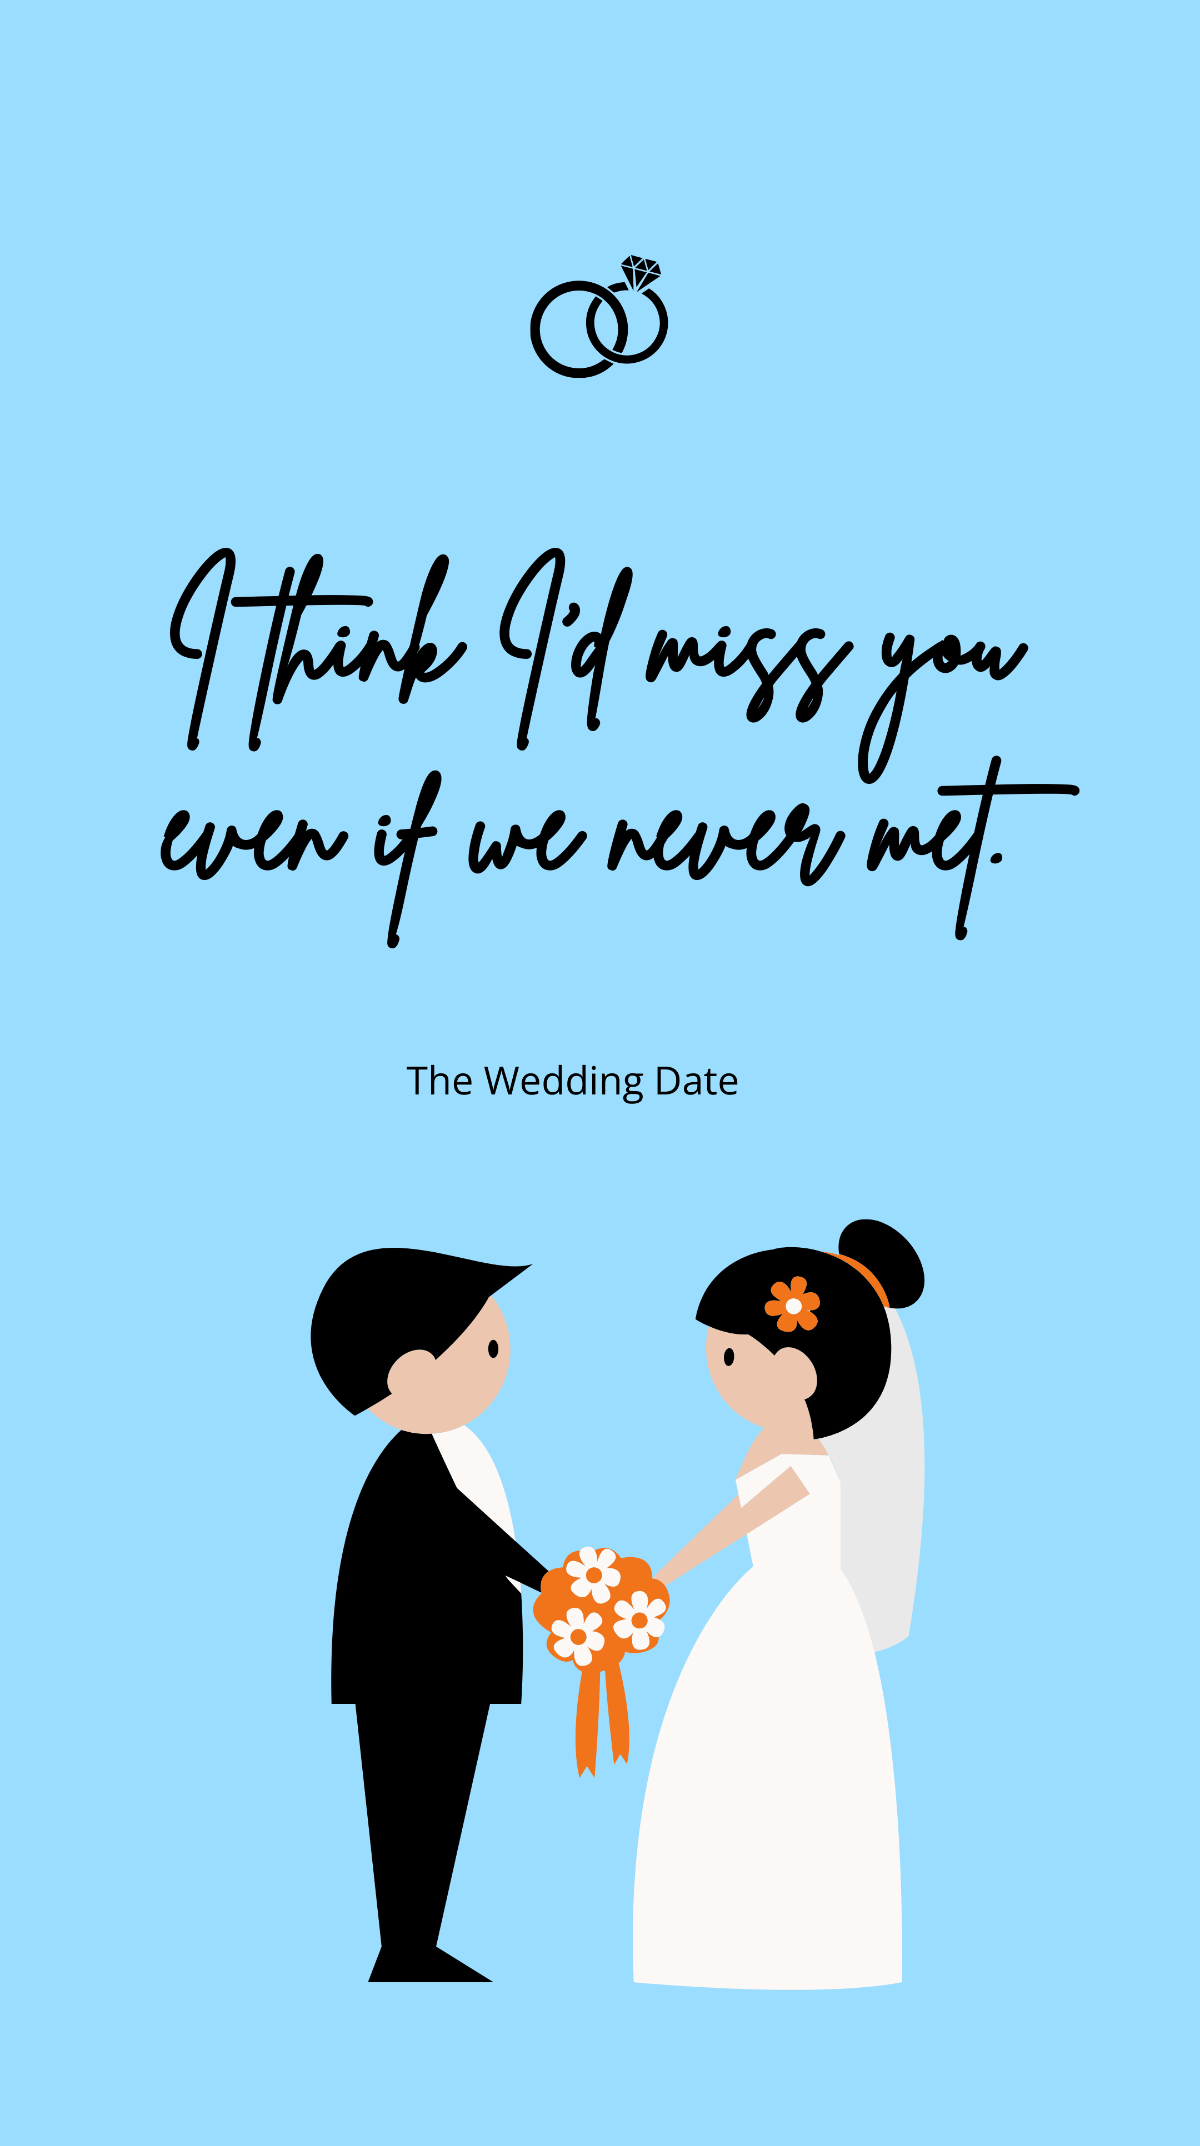 The Wedding Date - “I think I’d miss you even if we never met.” Template